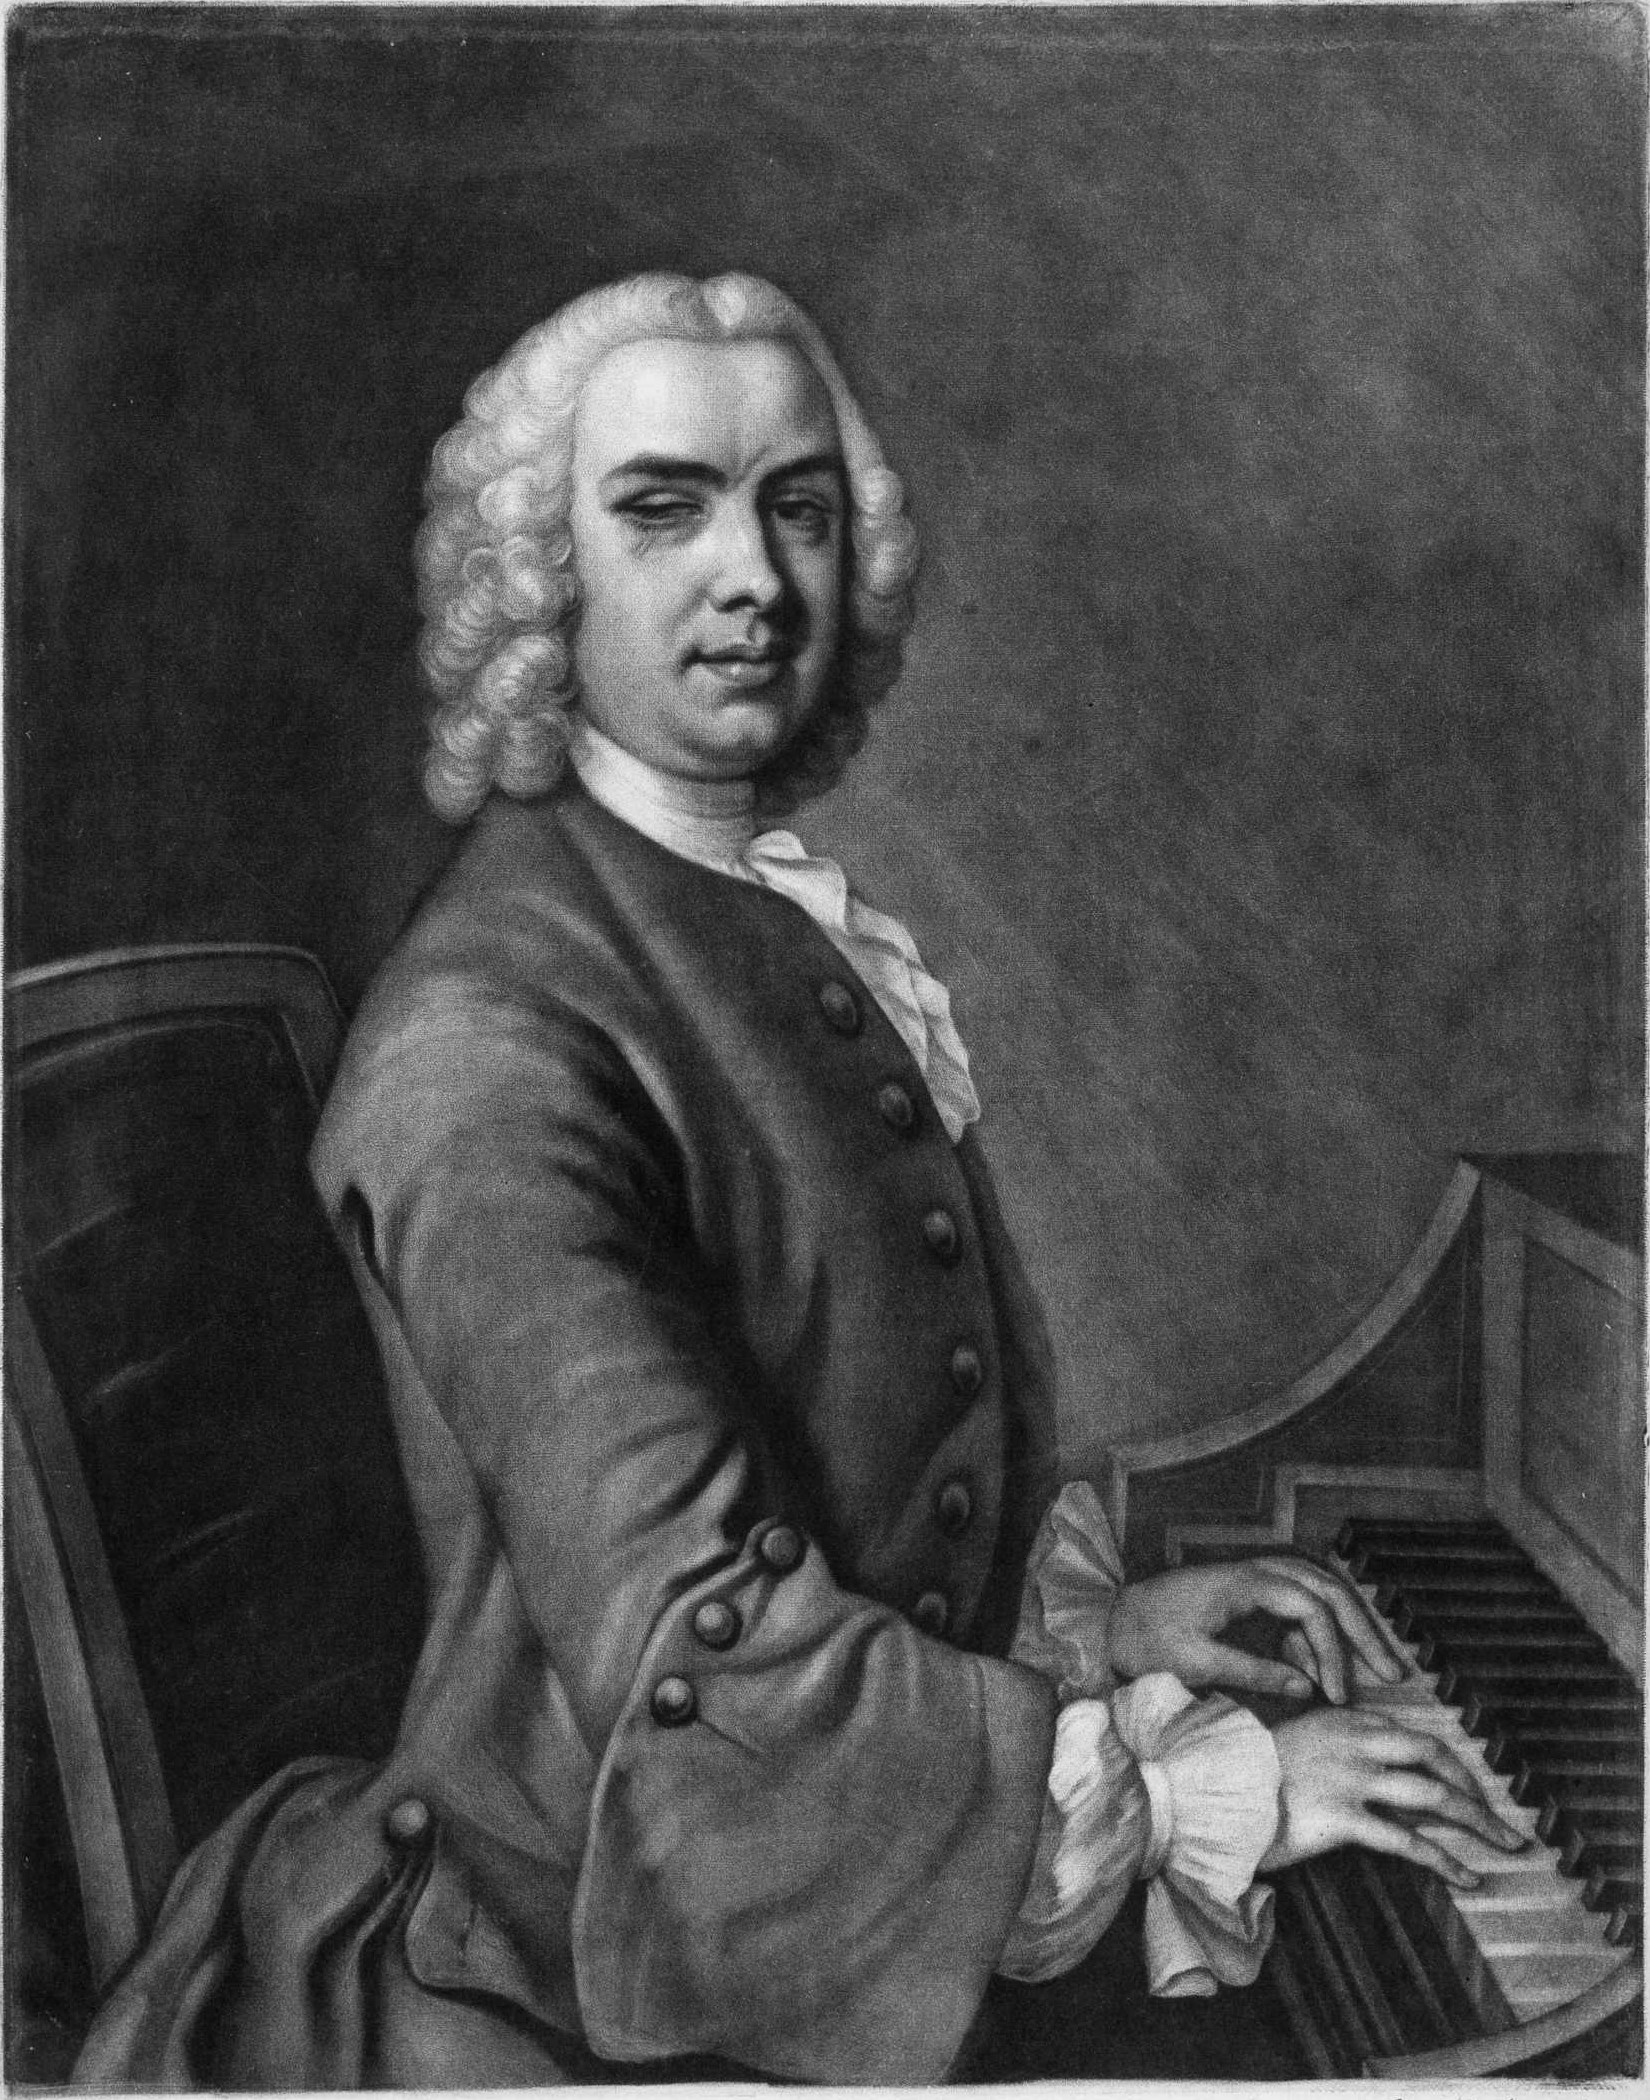 John Stanley, English organist and composer (d. 1786) was born on January 17, 1712.